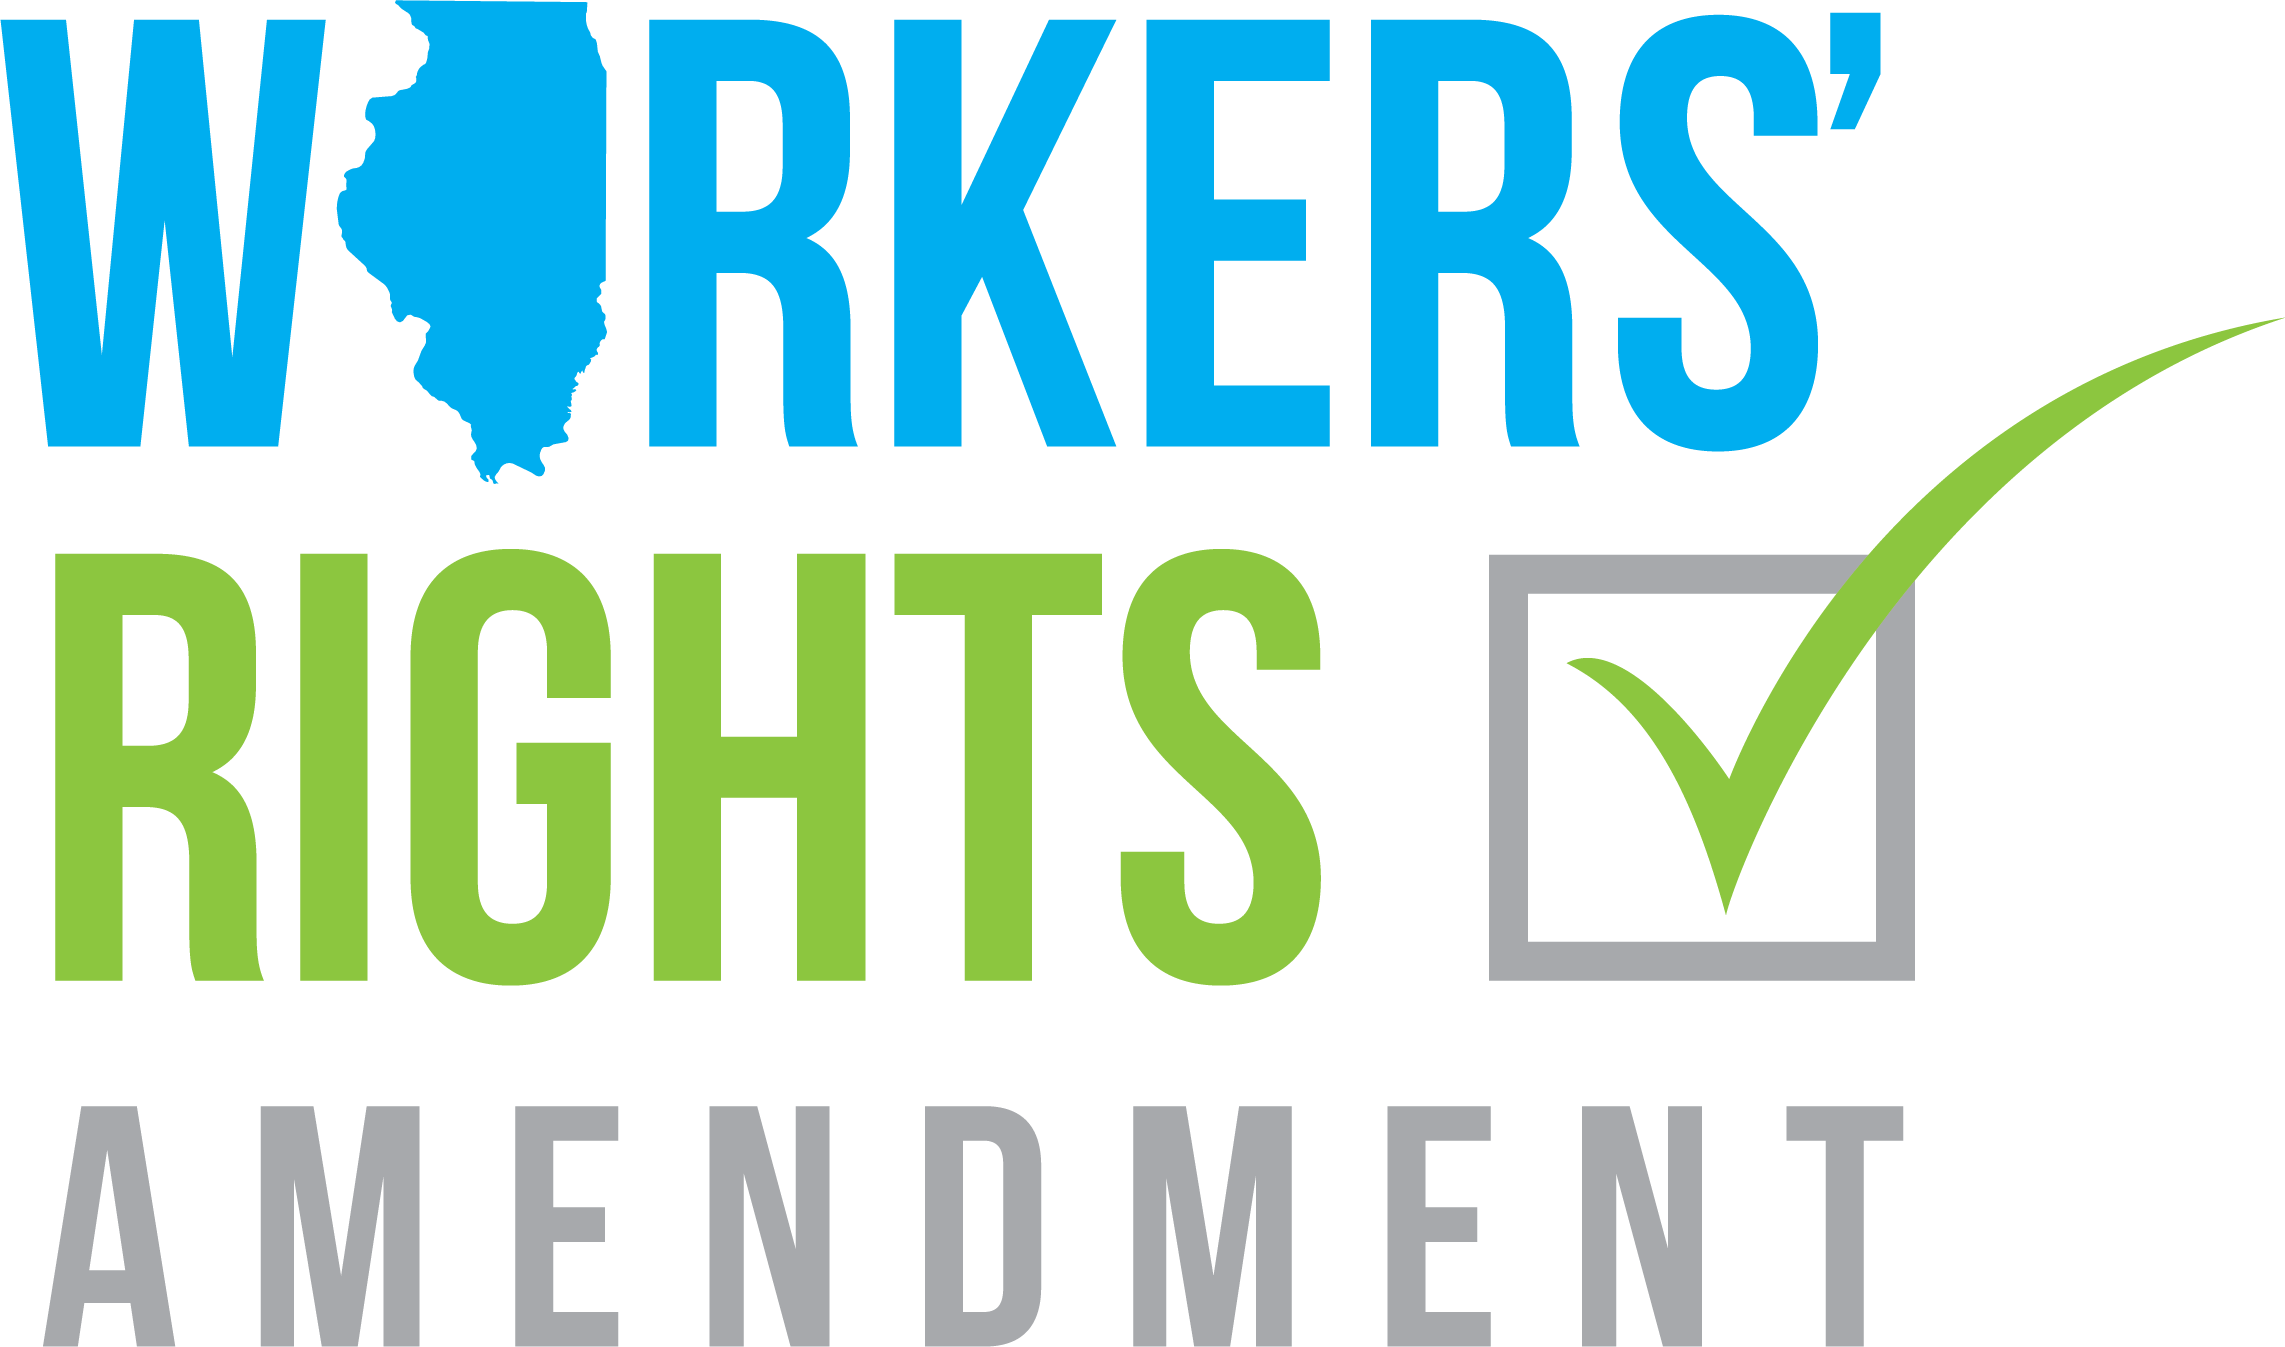 Vote Yes for Workers' Rights logo